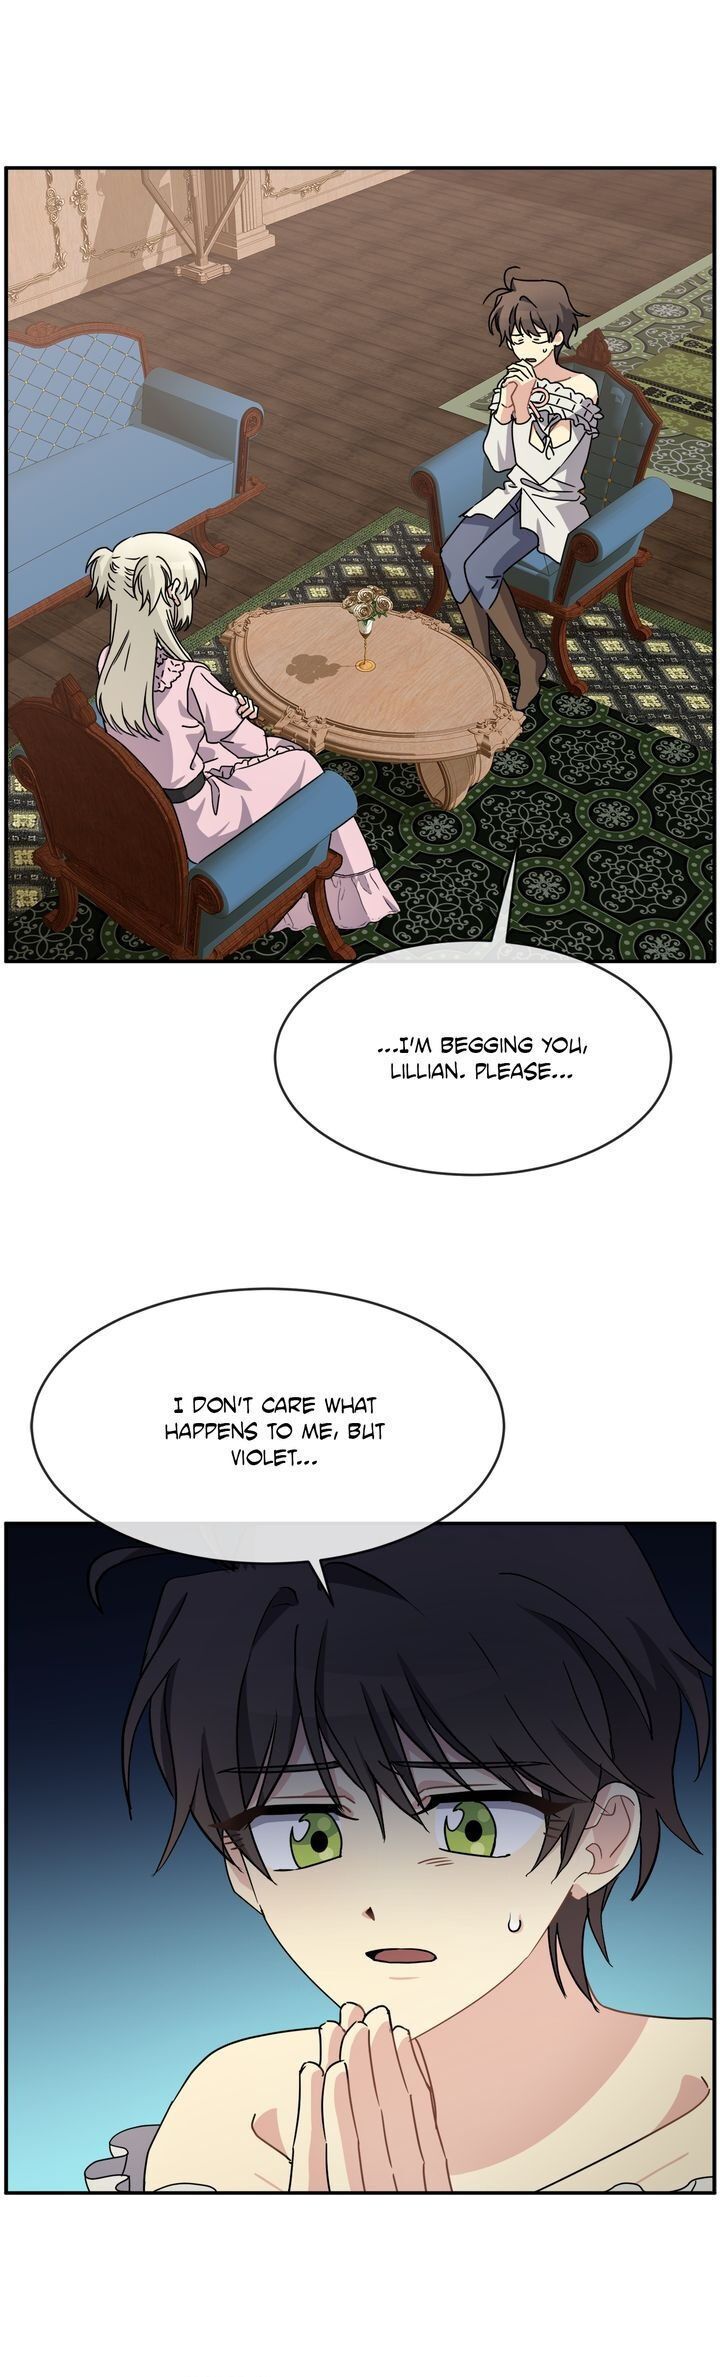 The 101St Heroine Chapter 047 page 1